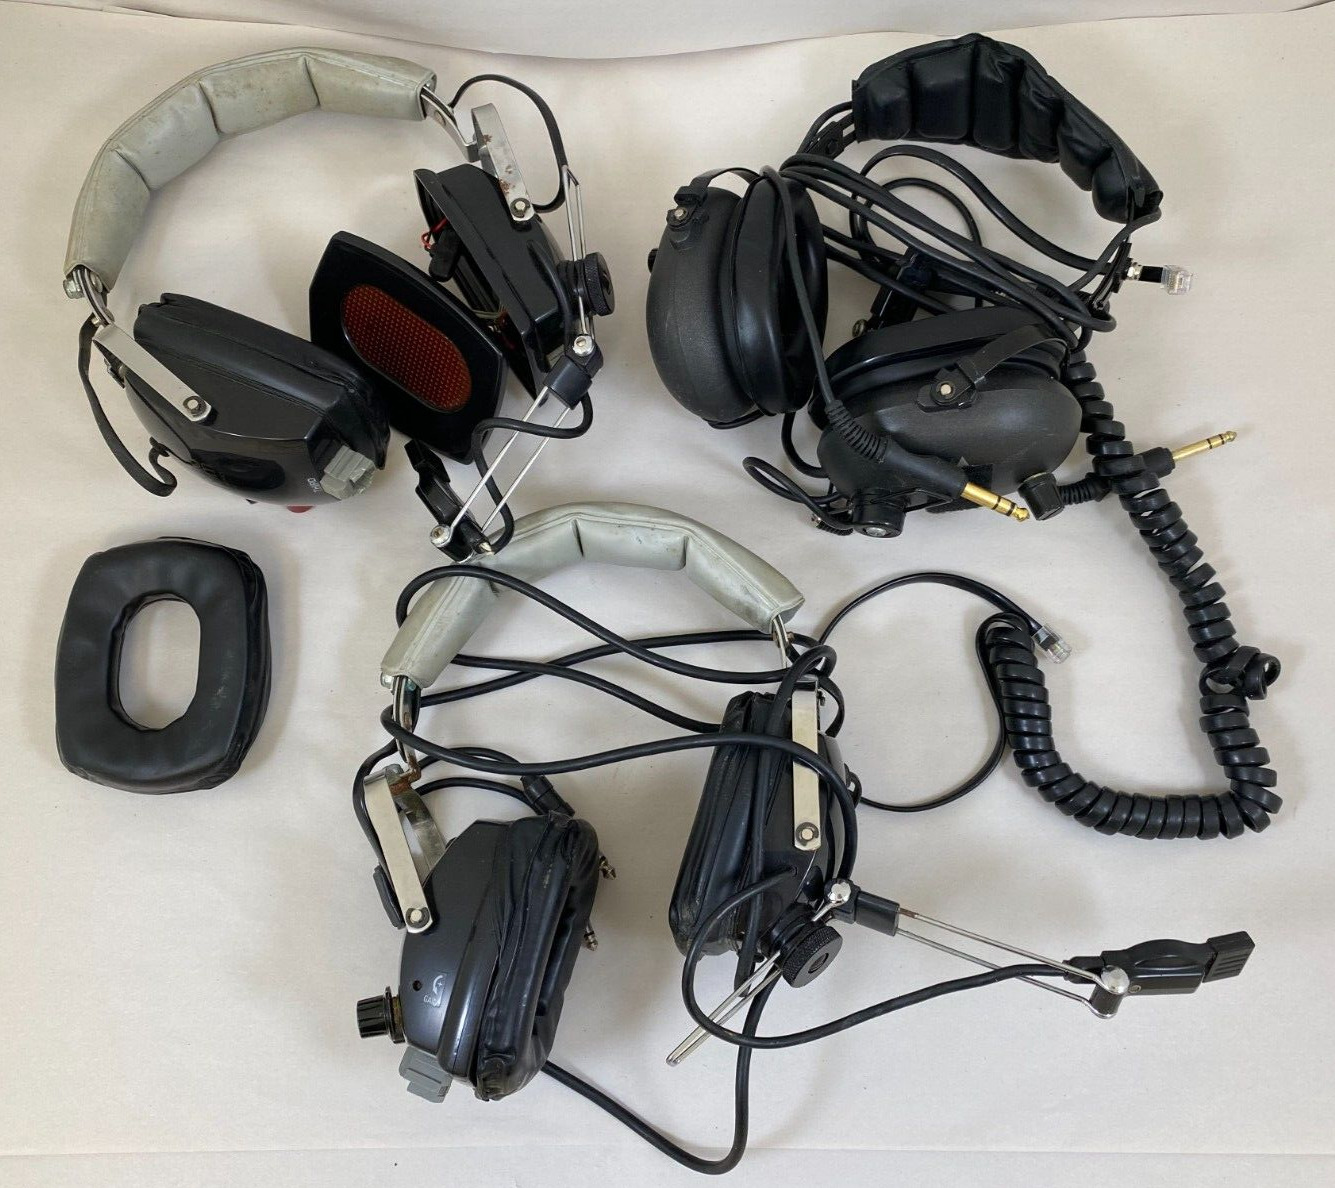 (3) VINTAGE OLD AVIATION HEADSETS SOFT COMM AUDIO COM, DISPLAY? PARTS ONLY